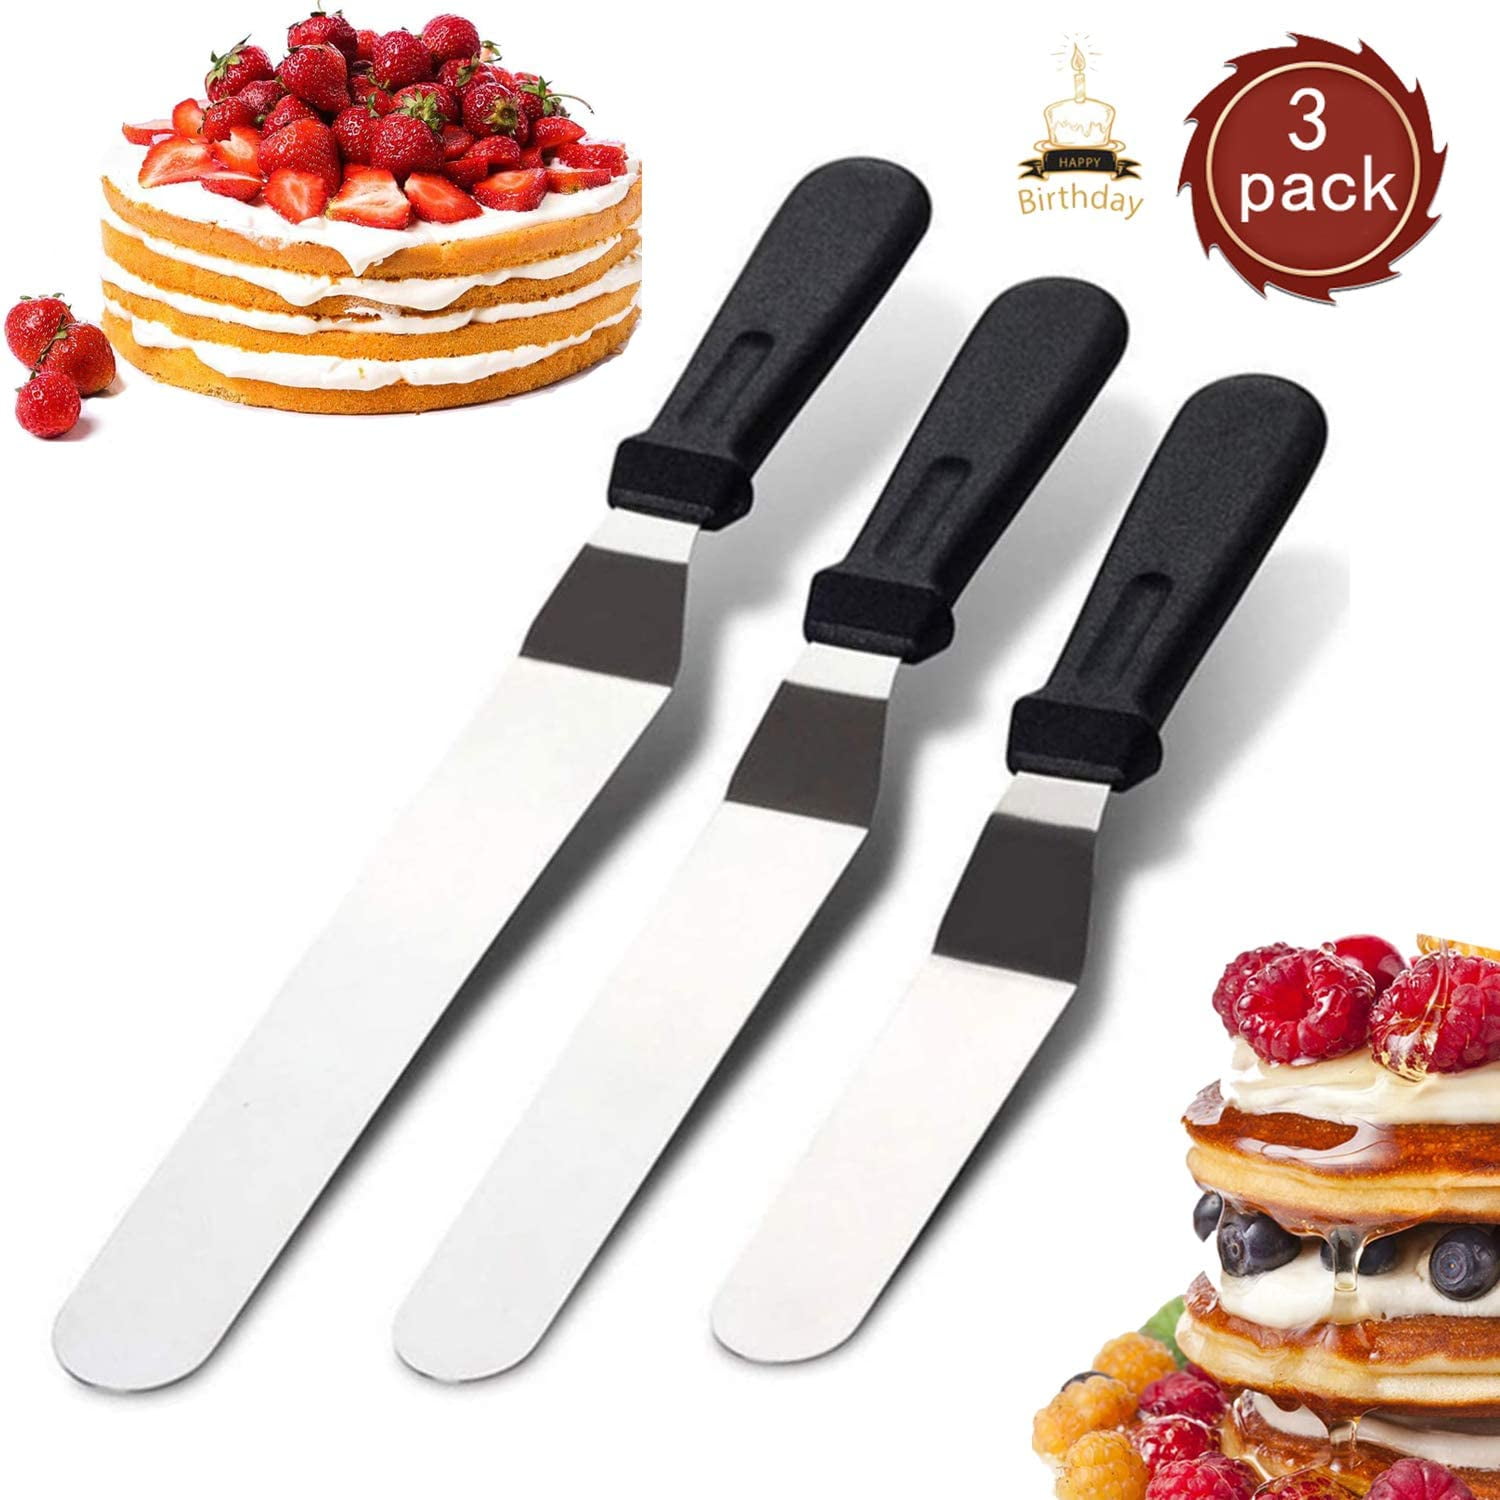 1X Stainless Steel Cake Cream Butter Spatula Icing Spreader Pastry Decor Tool 